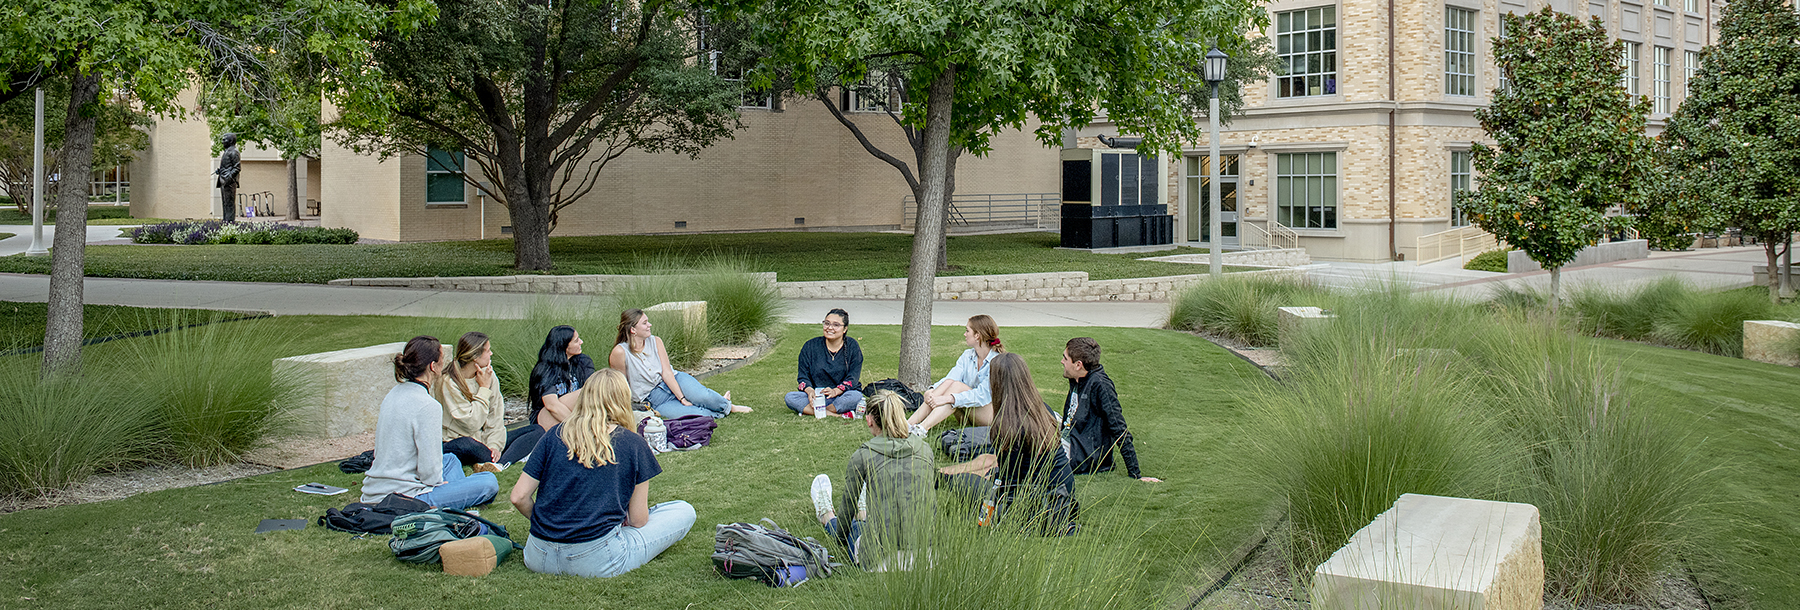 Section Image: Class meeting outside in the long grass. 